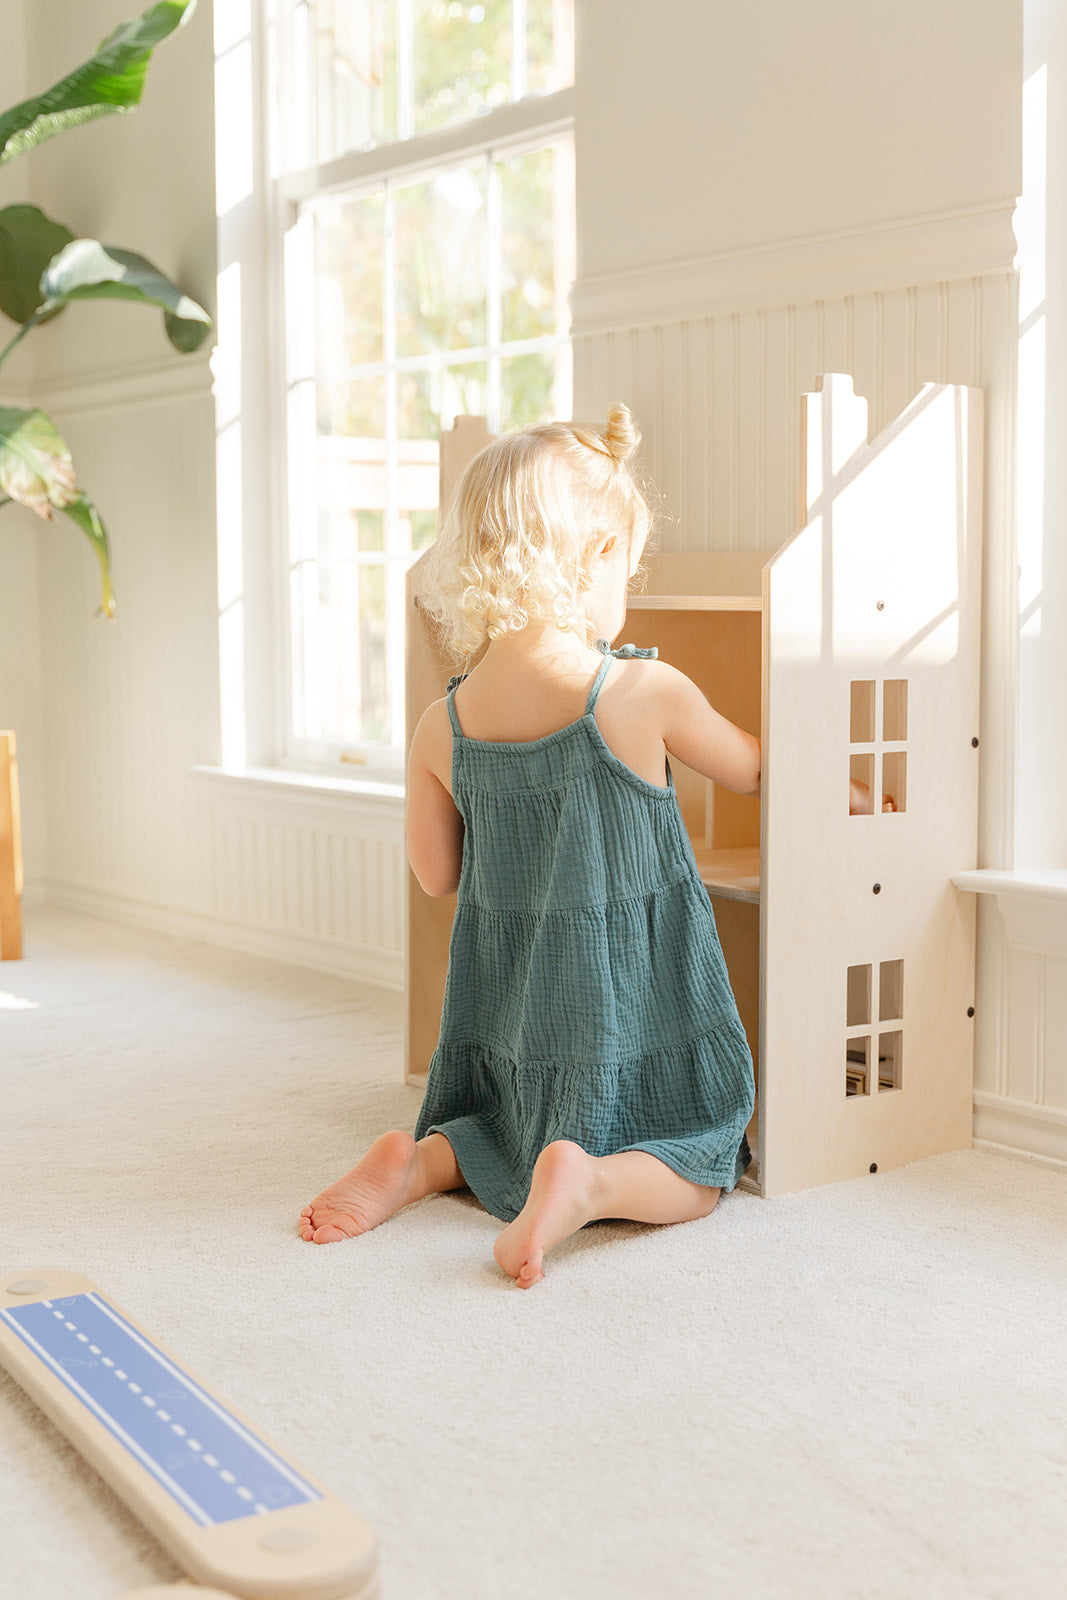 A girl playing with a dollhouse in a sunny room